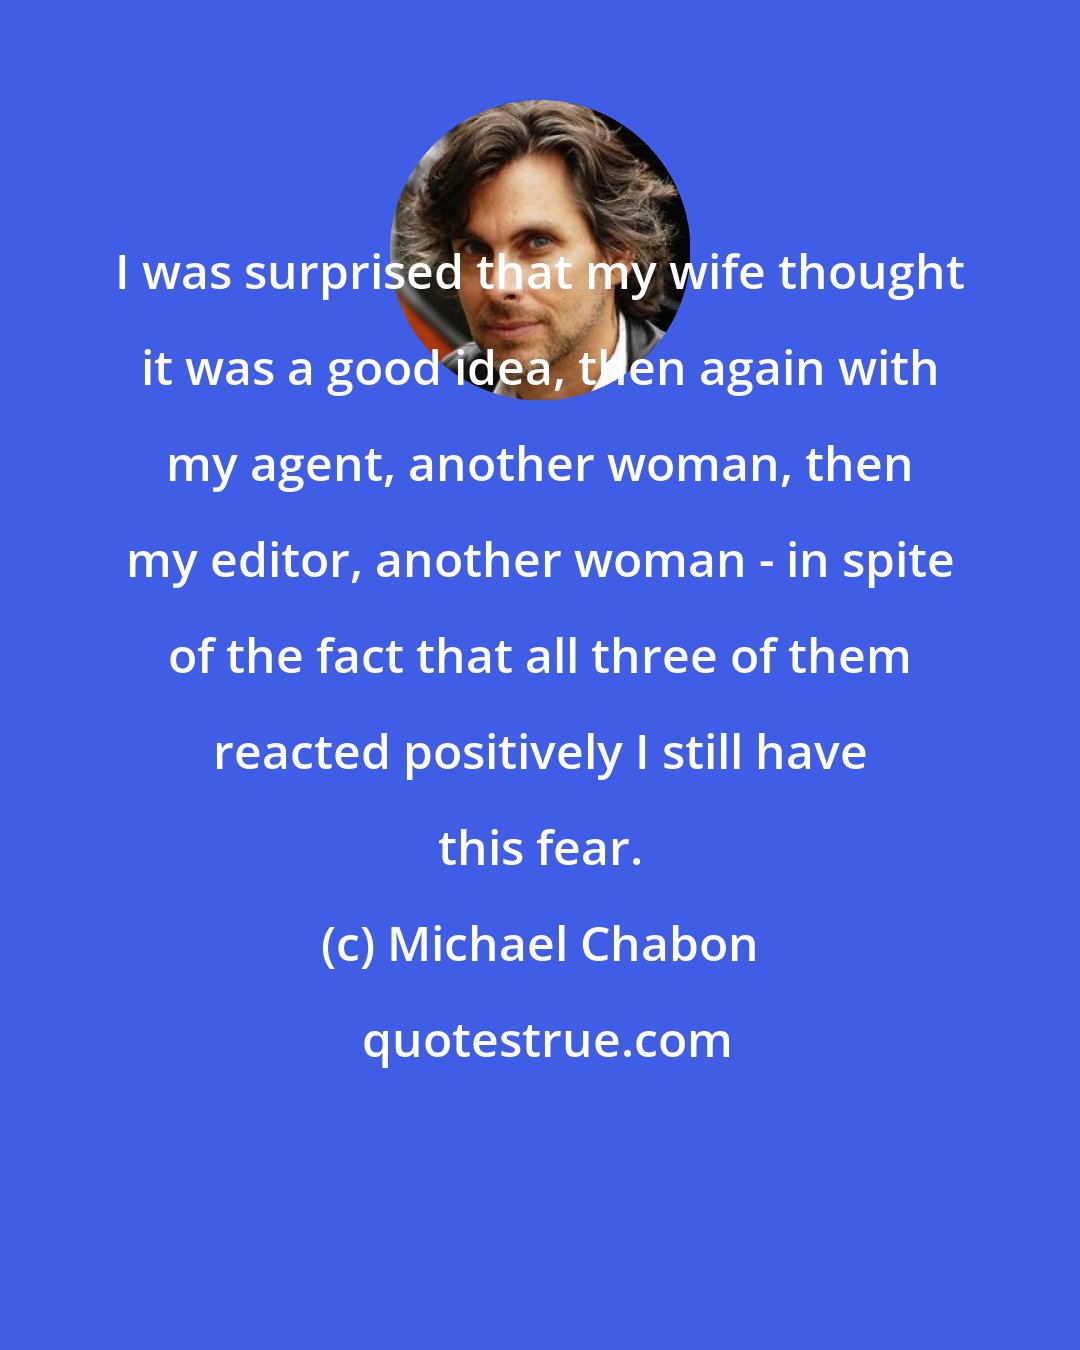 Michael Chabon: I was surprised that my wife thought it was a good idea, then again with my agent, another woman, then my editor, another woman - in spite of the fact that all three of them reacted positively I still have this fear.